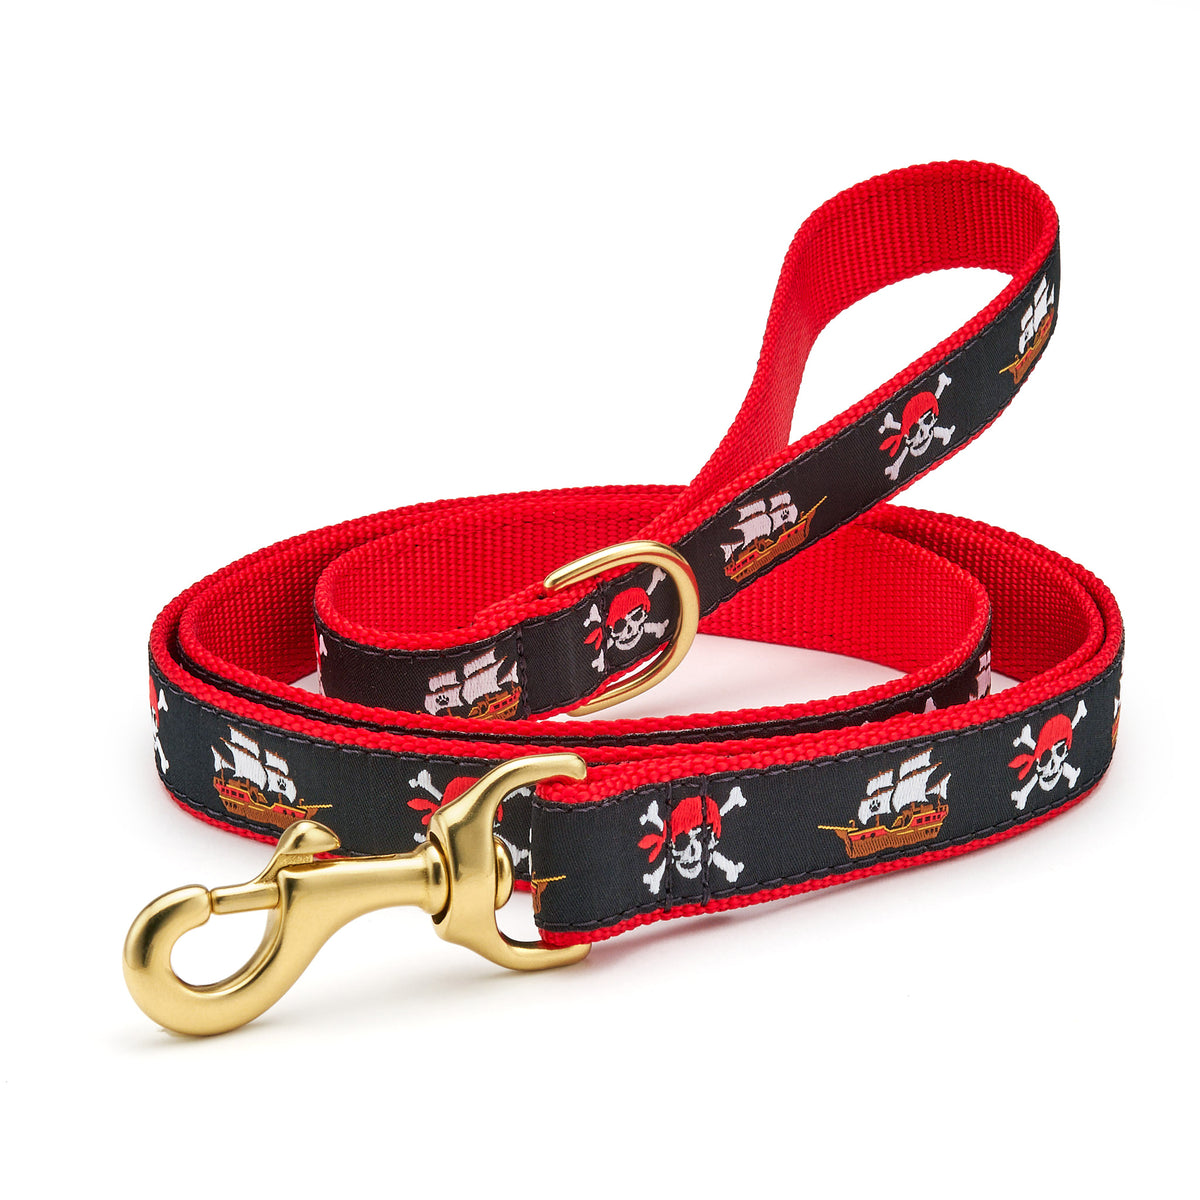 Dog leashes and leads –